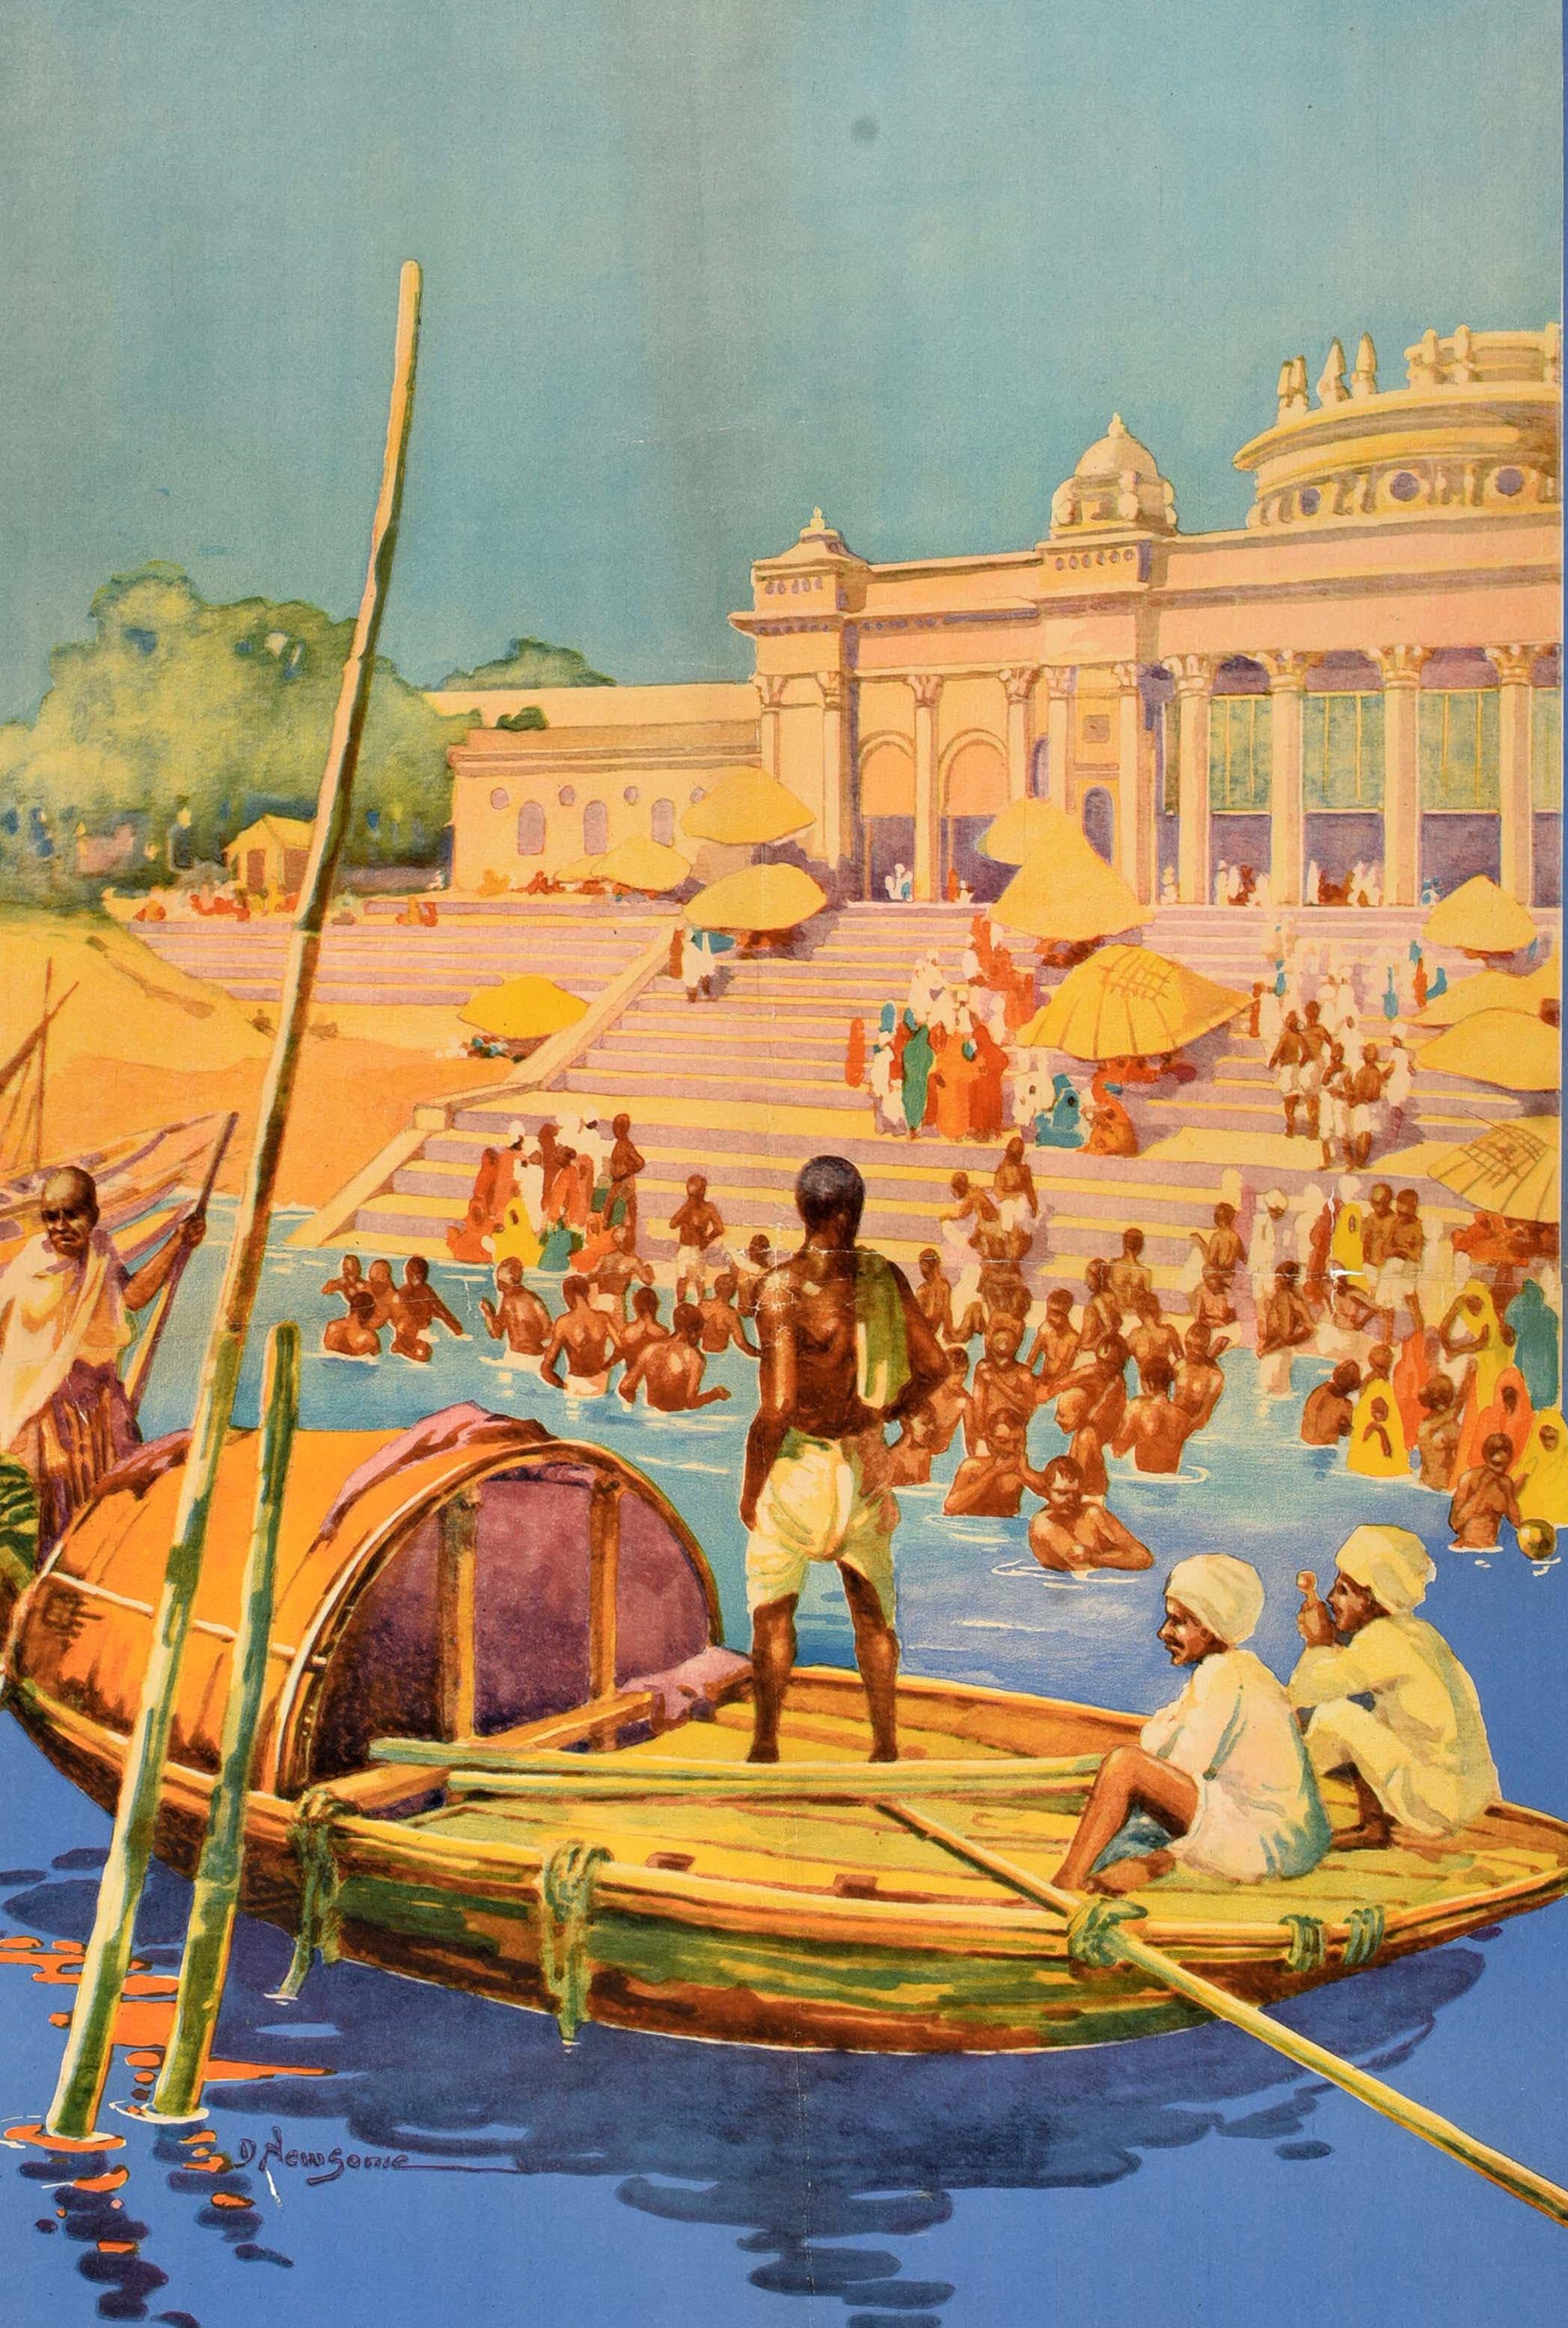 Original antique Asia travel poster for Mullick Ghat Calcutta / Kolkata in India featuring artwork by the British artist Dorothy Newsome (1900-1980) showing people, some families and children socialising and washing on the ghats, the steps leading